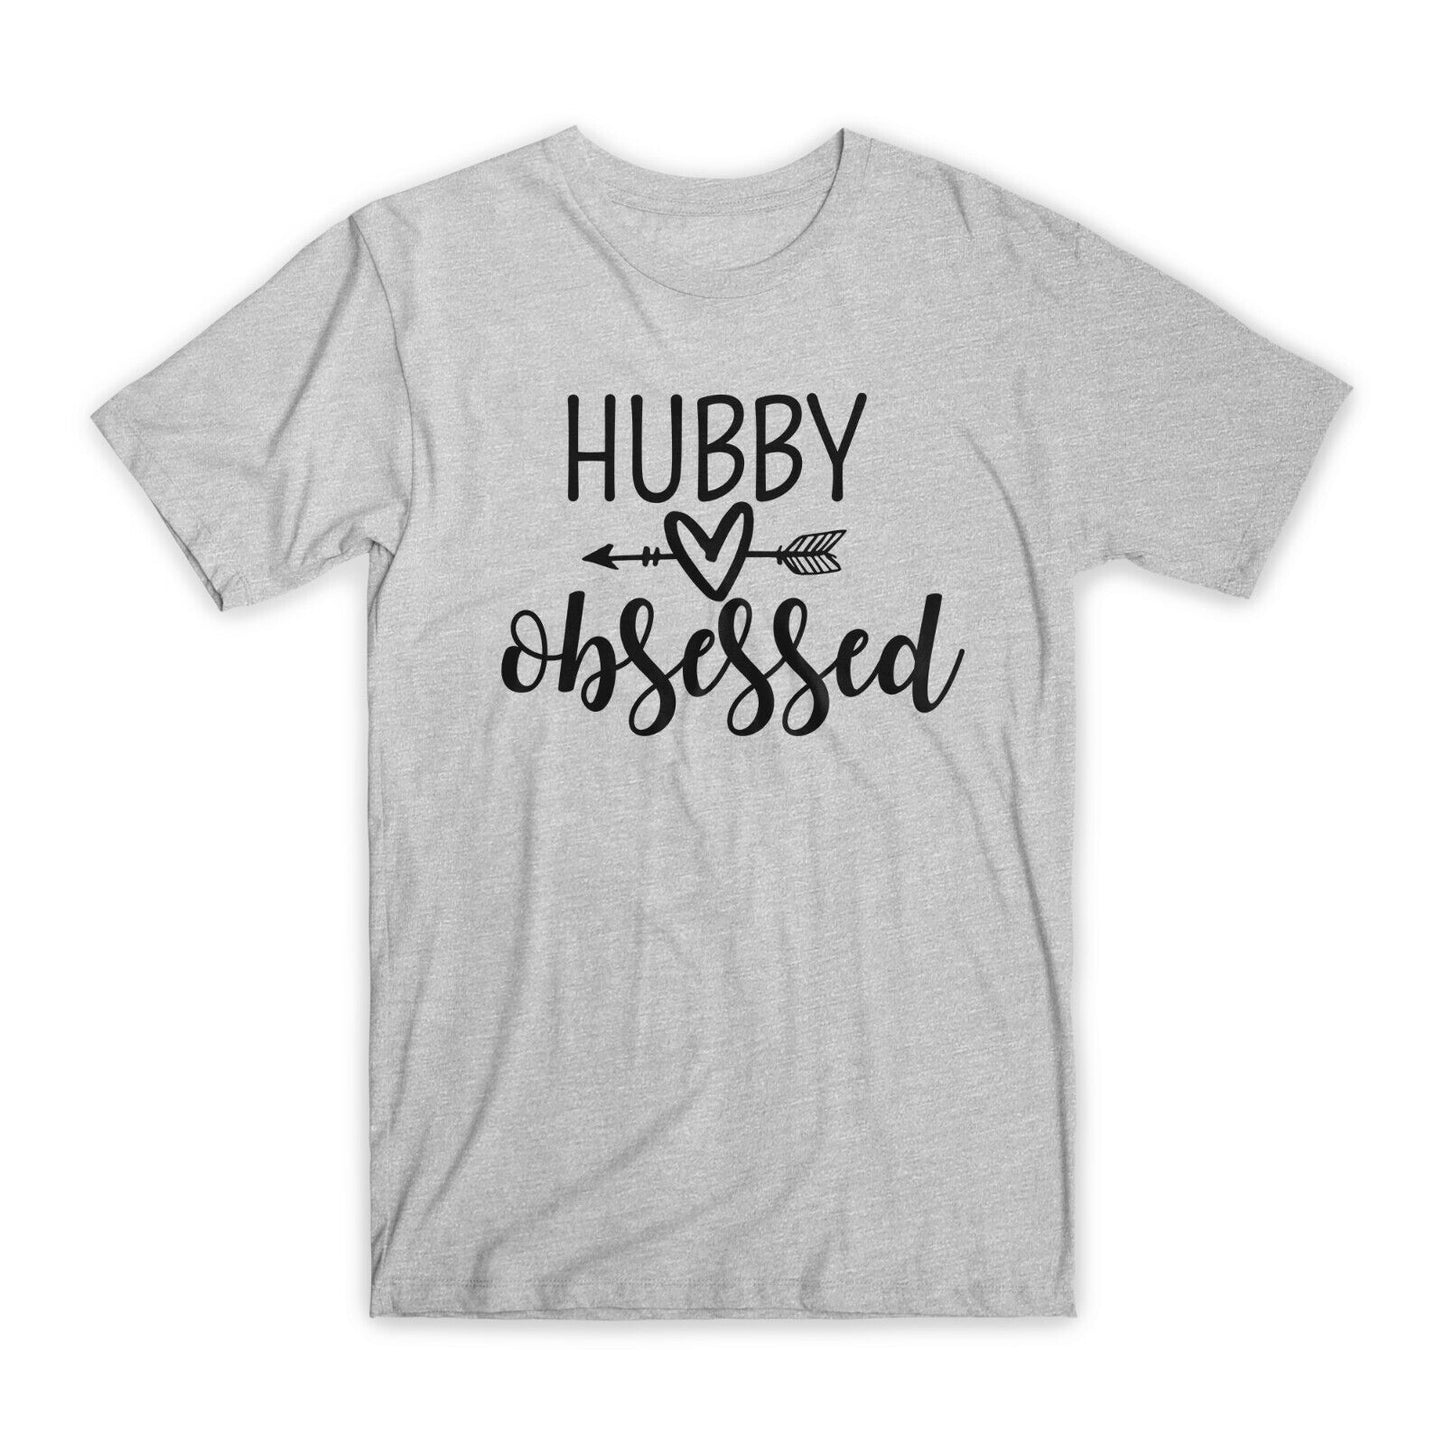 Hubby Obsessed T-Shirt Premium Soft Cotton Crew Neck Funny Tees Novelty Gift NEW